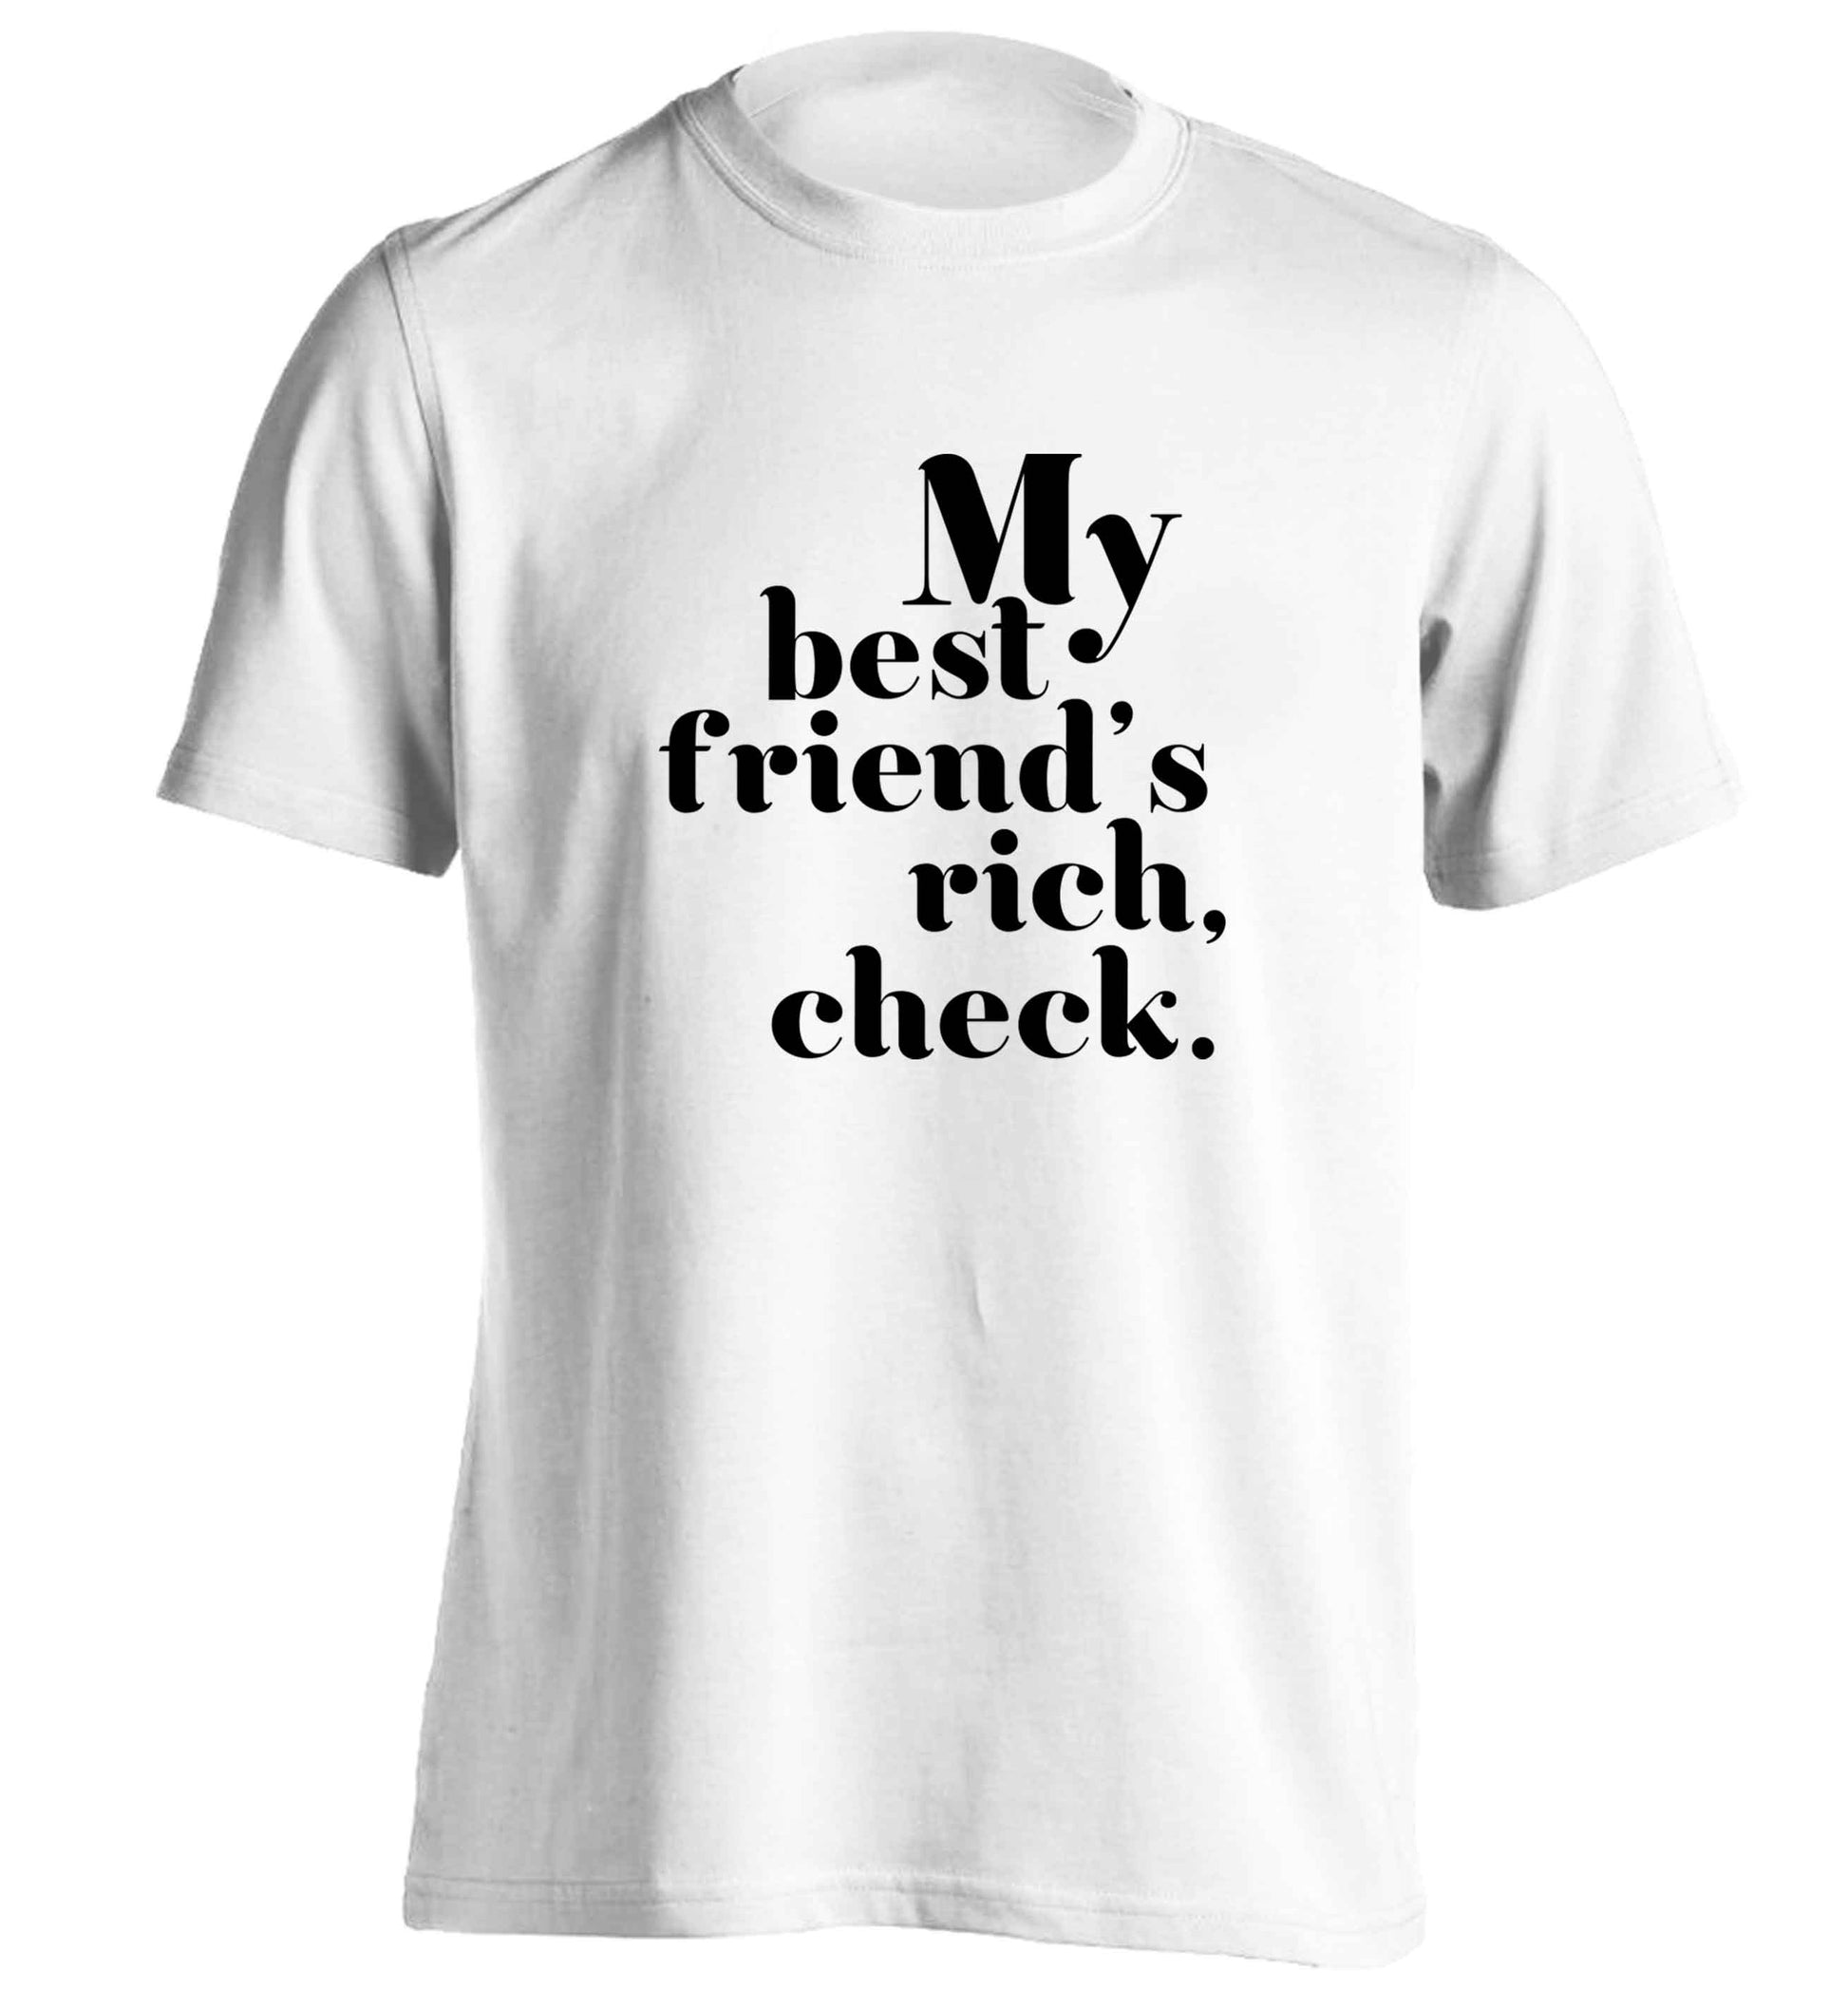 Got a rich best friend? Why not ask them to get you this, just let us  know and we'll tripple the price ;)  adults unisex white Tshirt 2XL